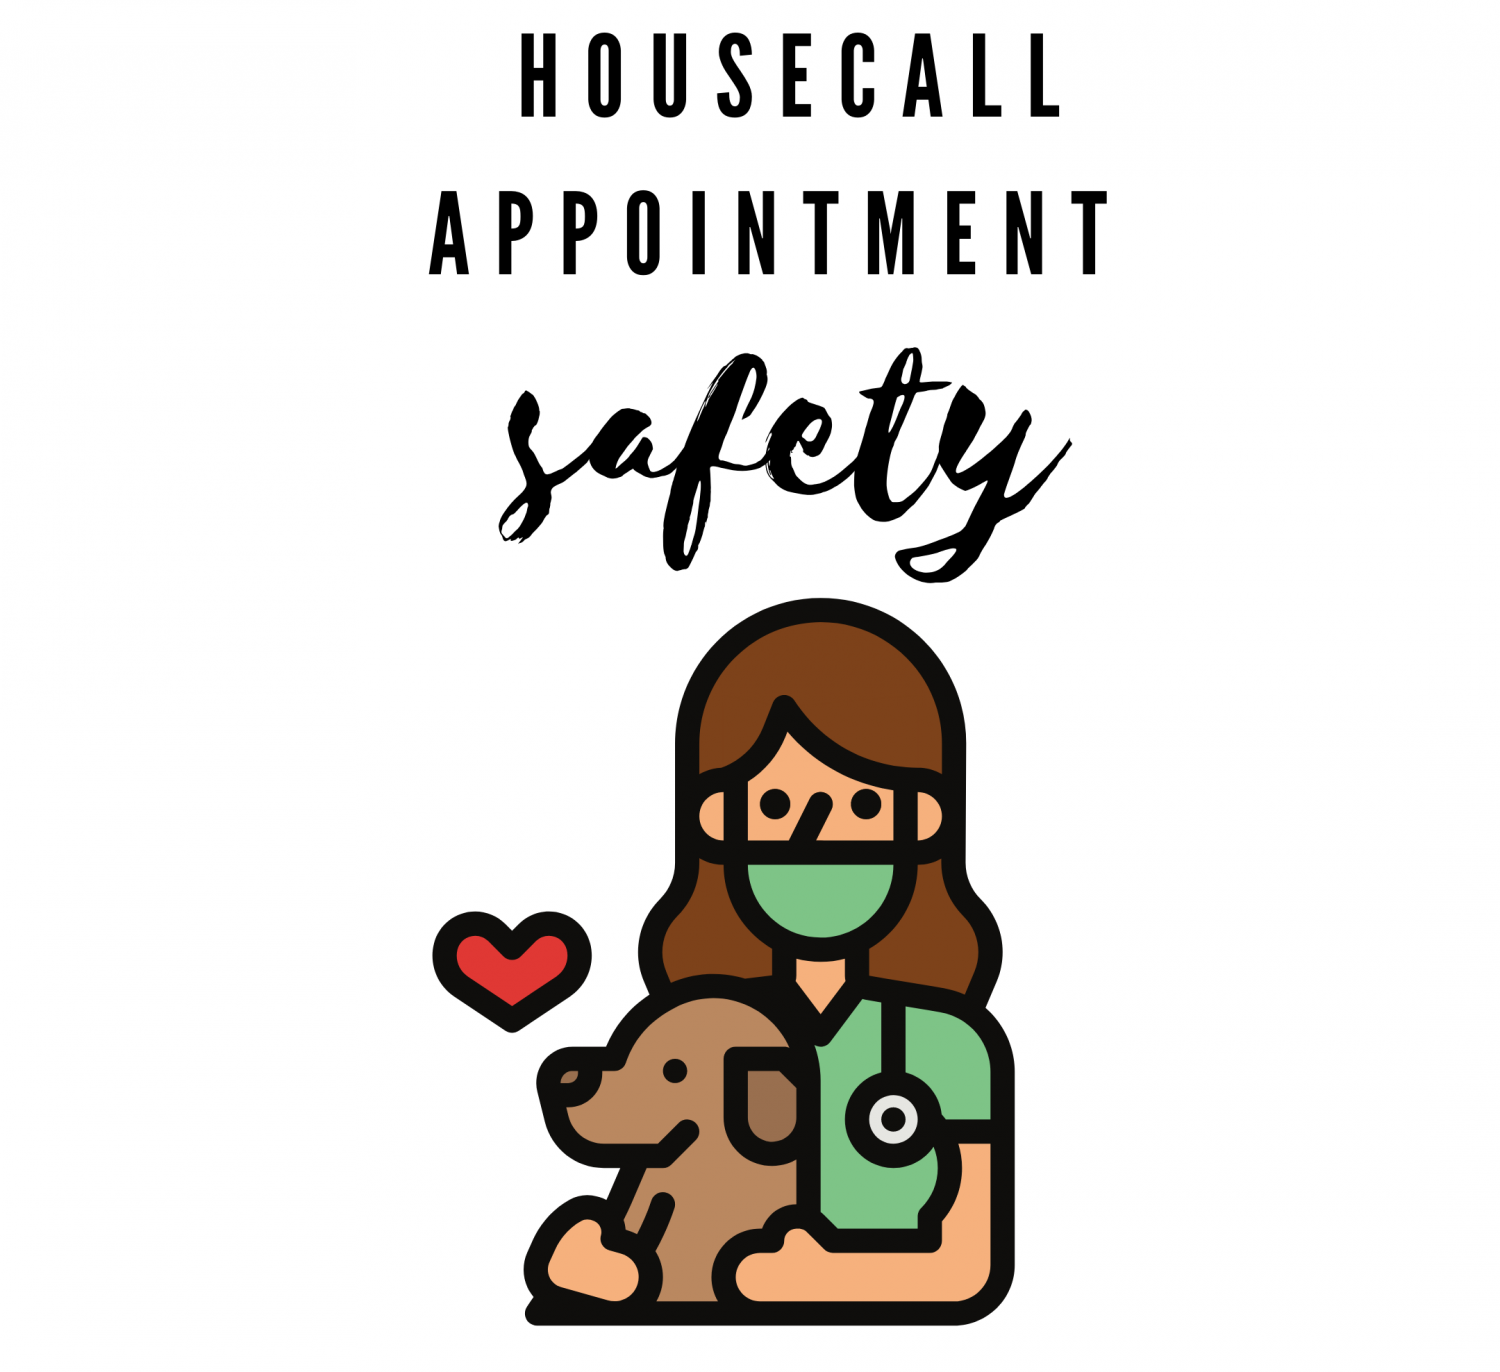 Housecall Appointment Safety